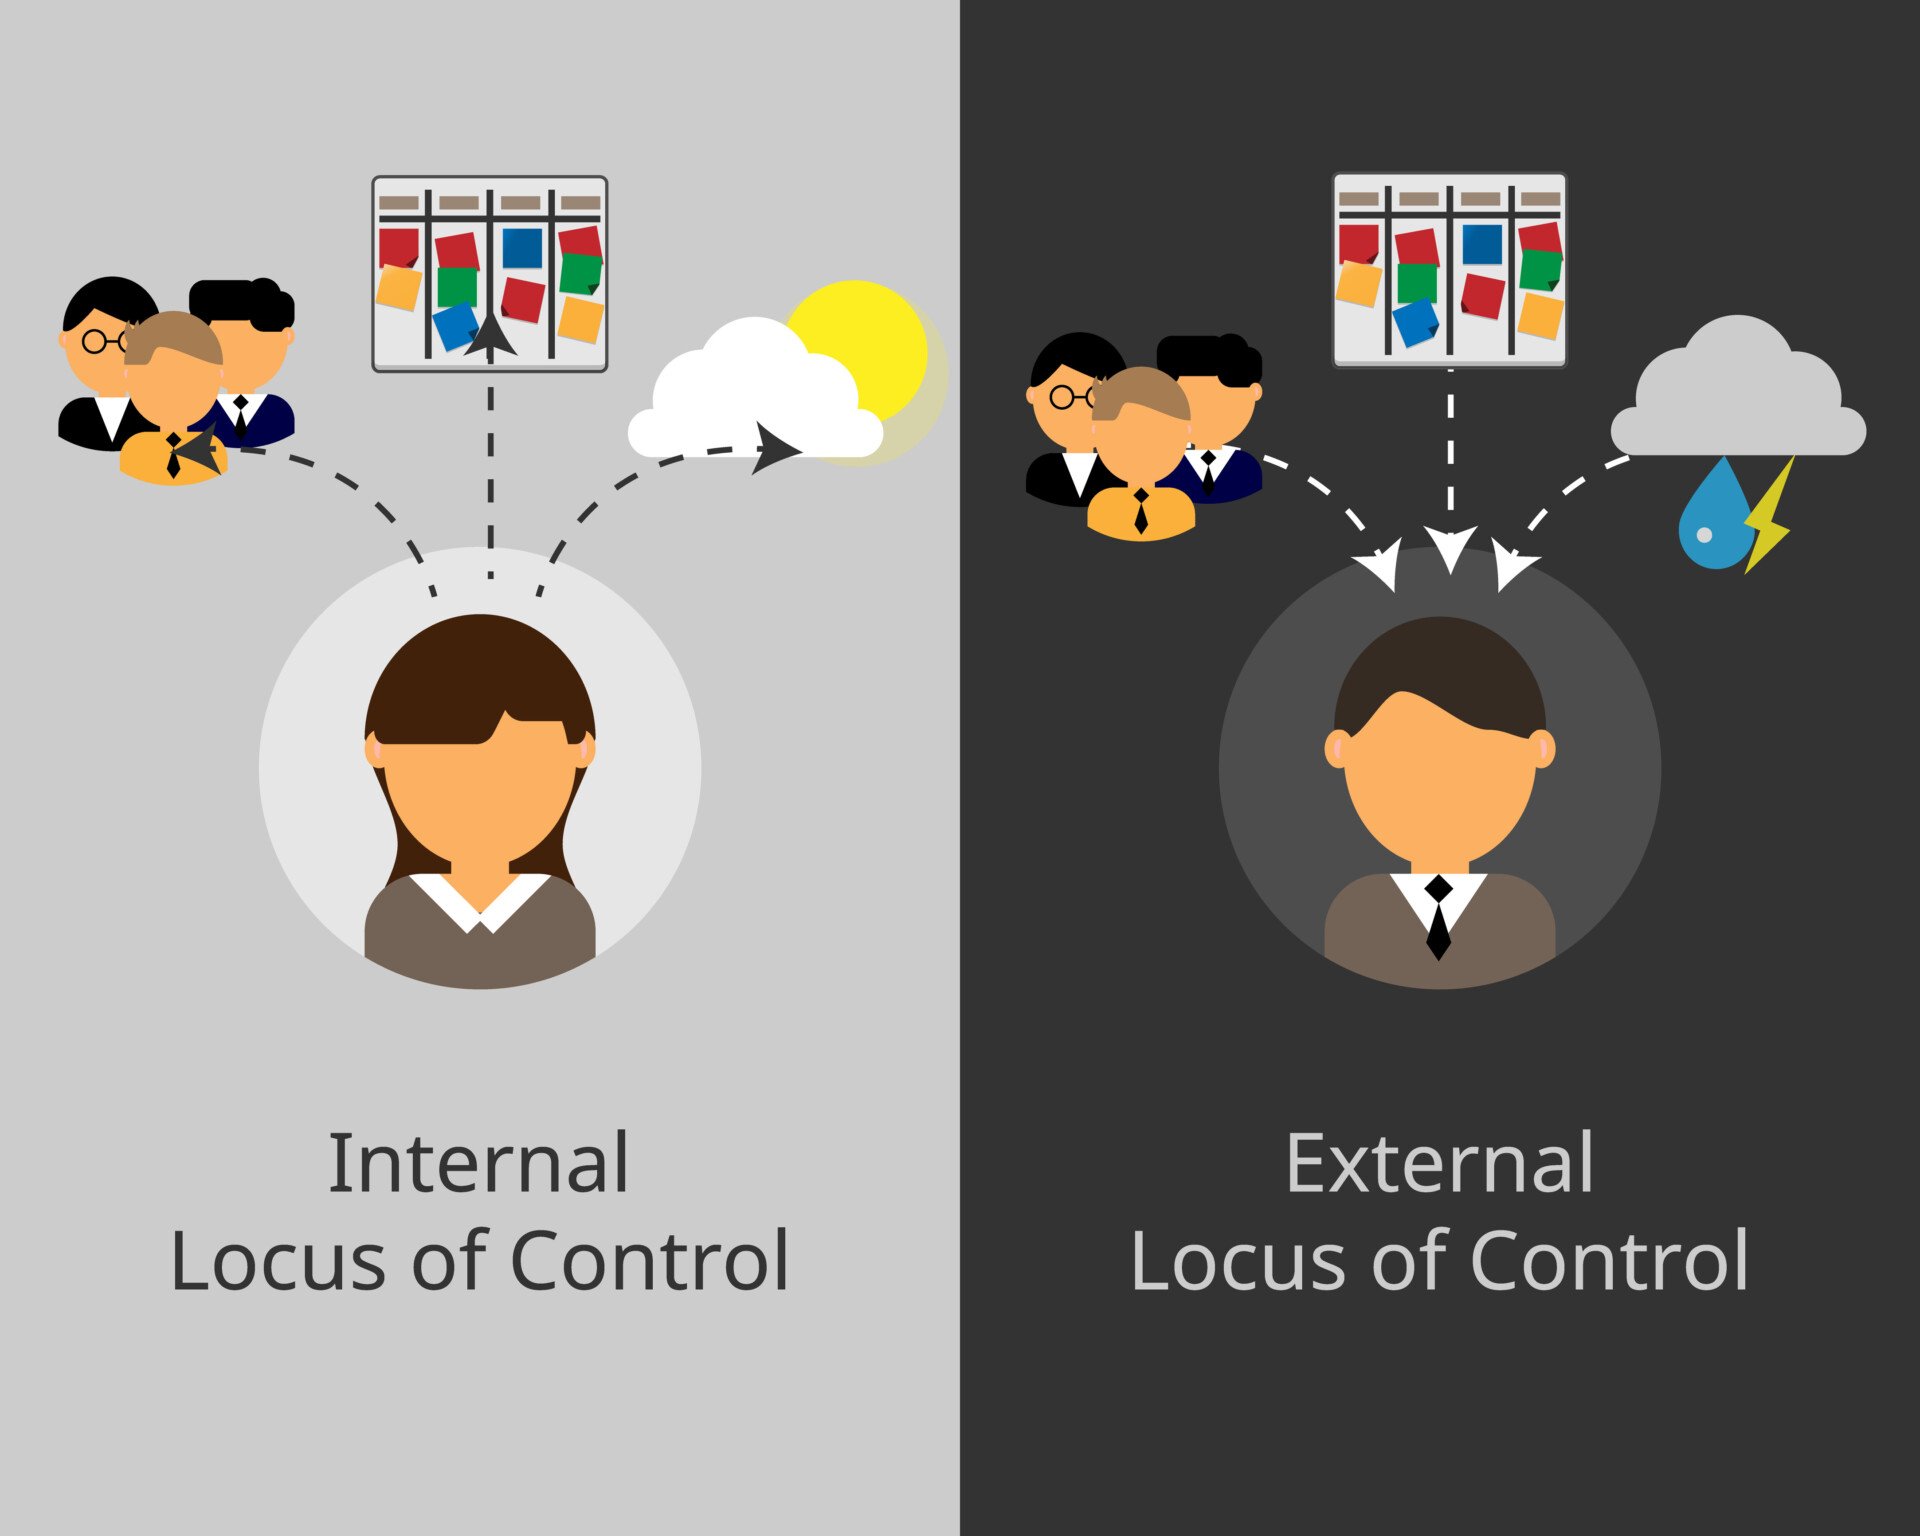 an image outlining internal locus of control on one side and external locus of control on the other